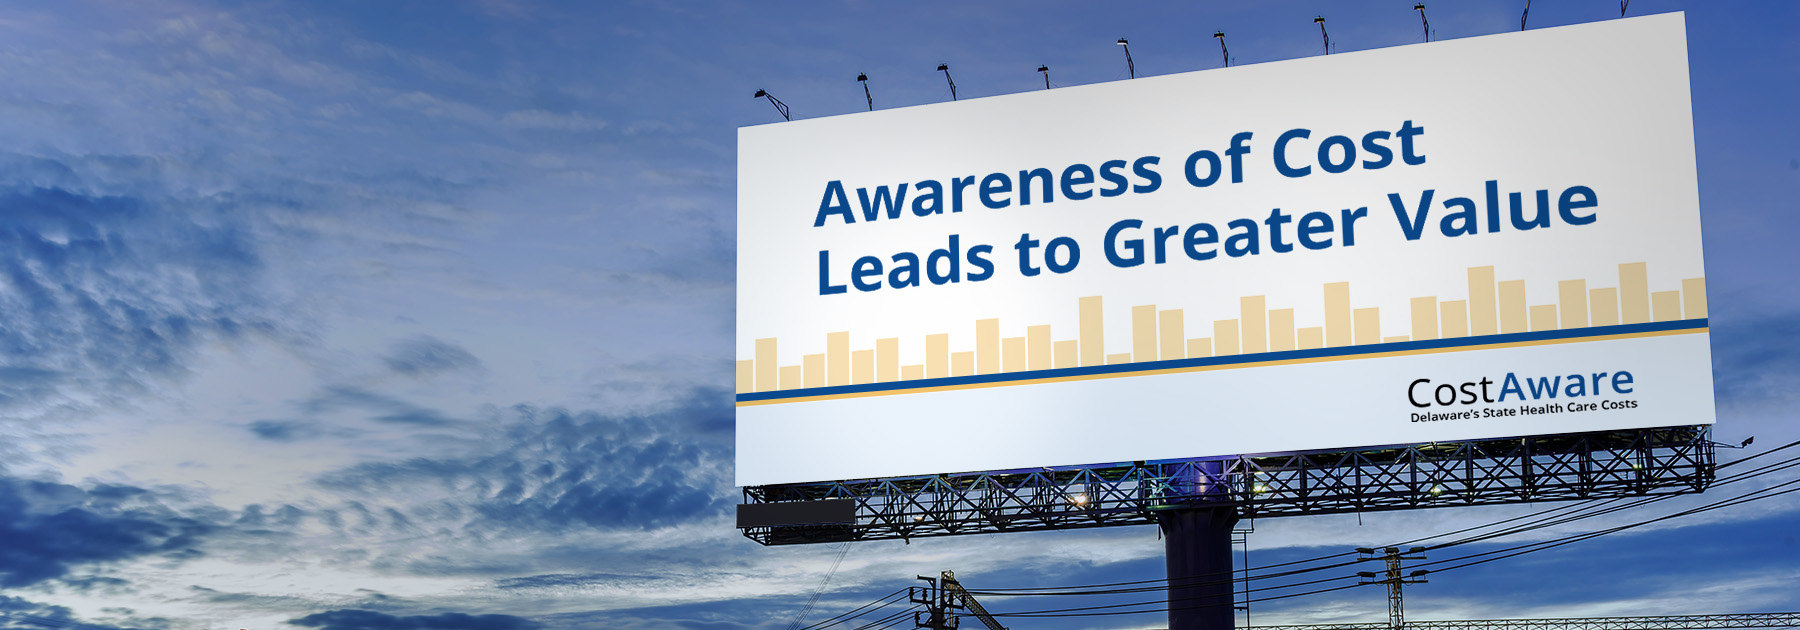 Billboard: Awareness of Cost Leads to Greater Value